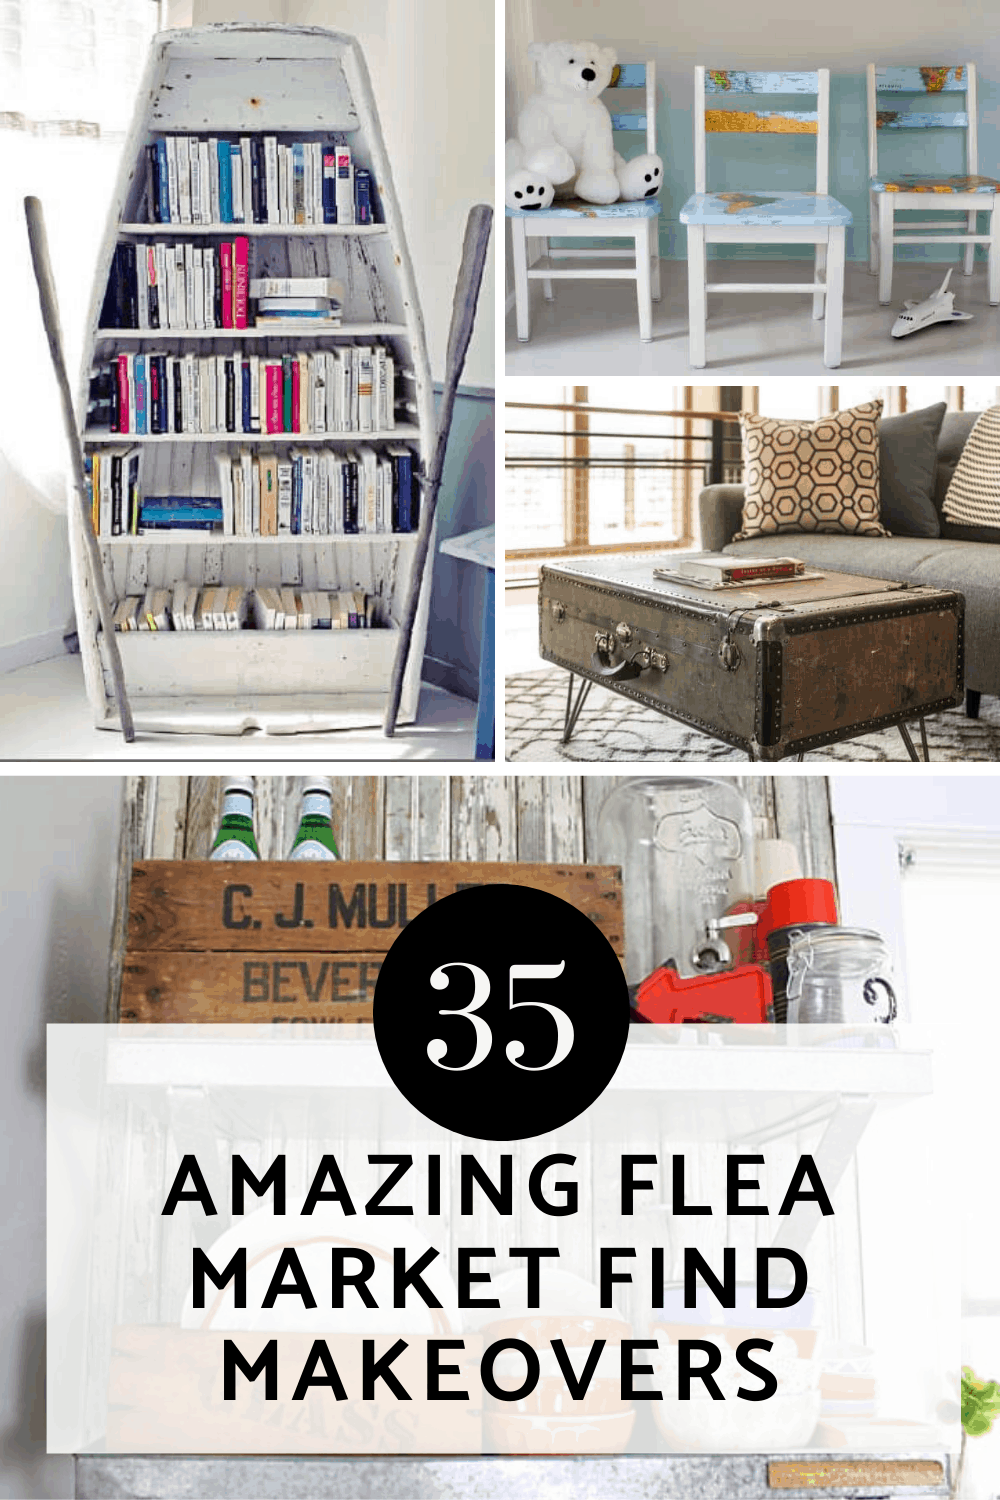 Wow! These flea market makeovers are super creative - get the inspiration you need to repurpose something you thrifted